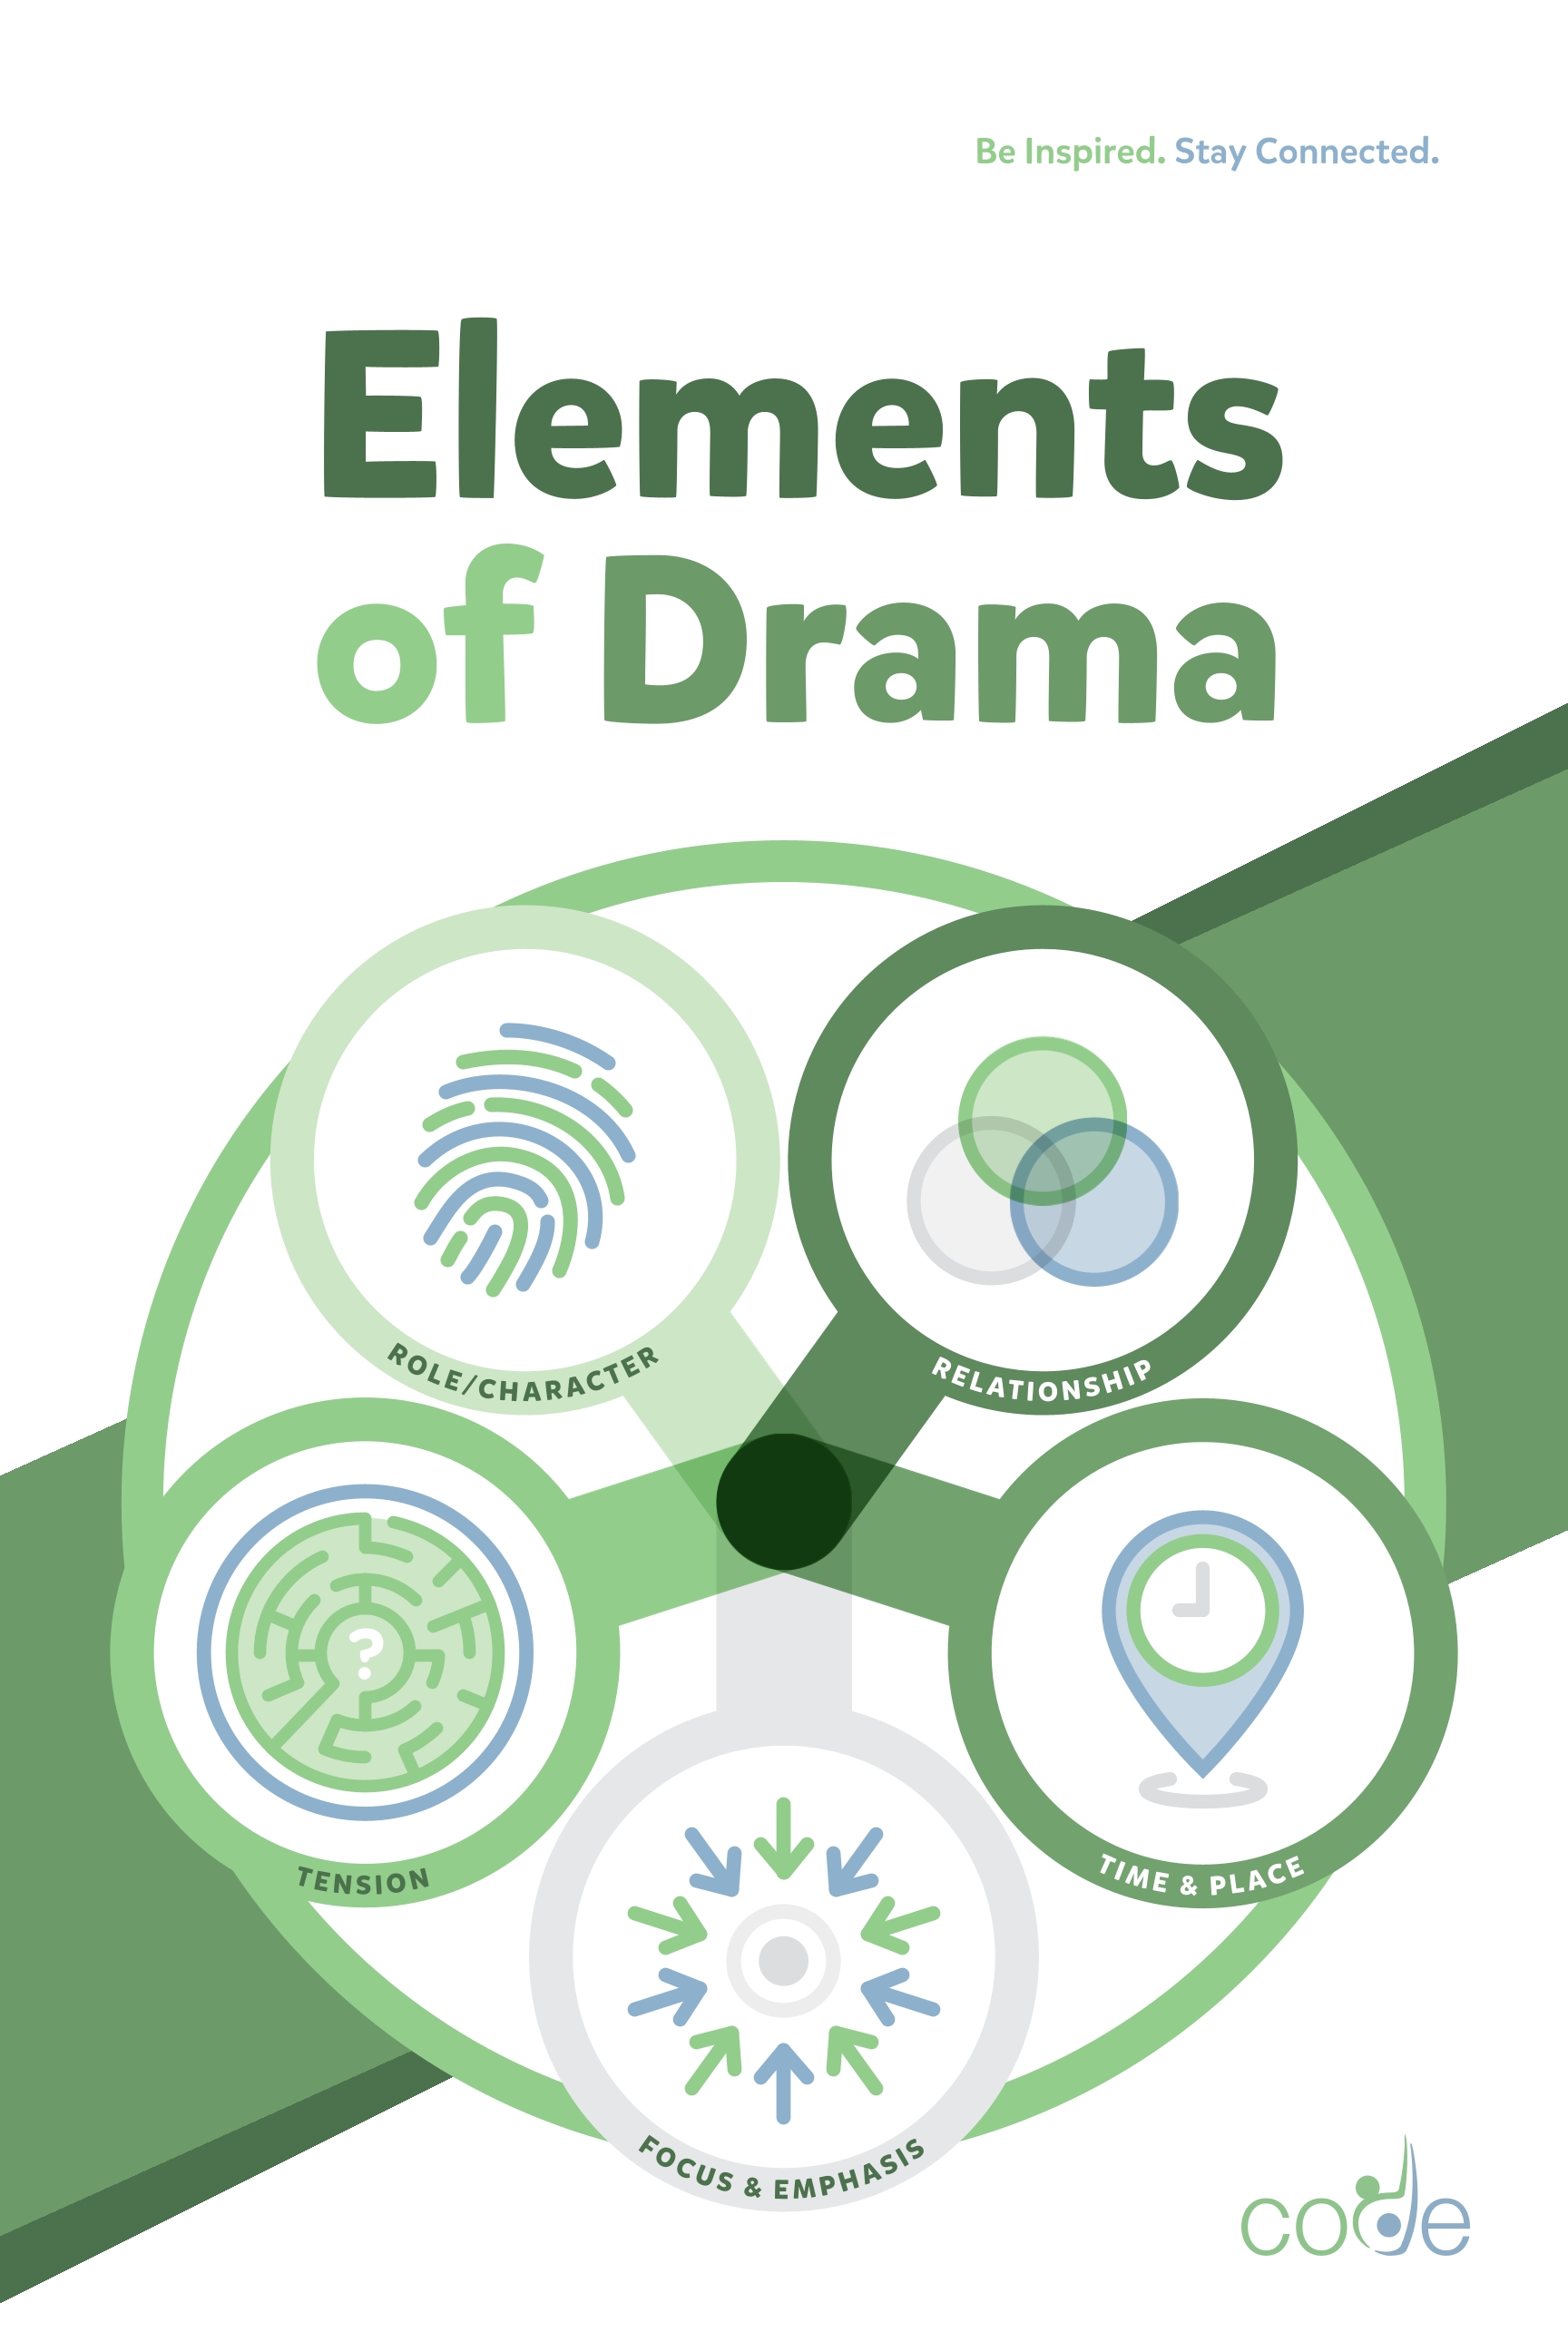 Elements of Drama Overview Poster image